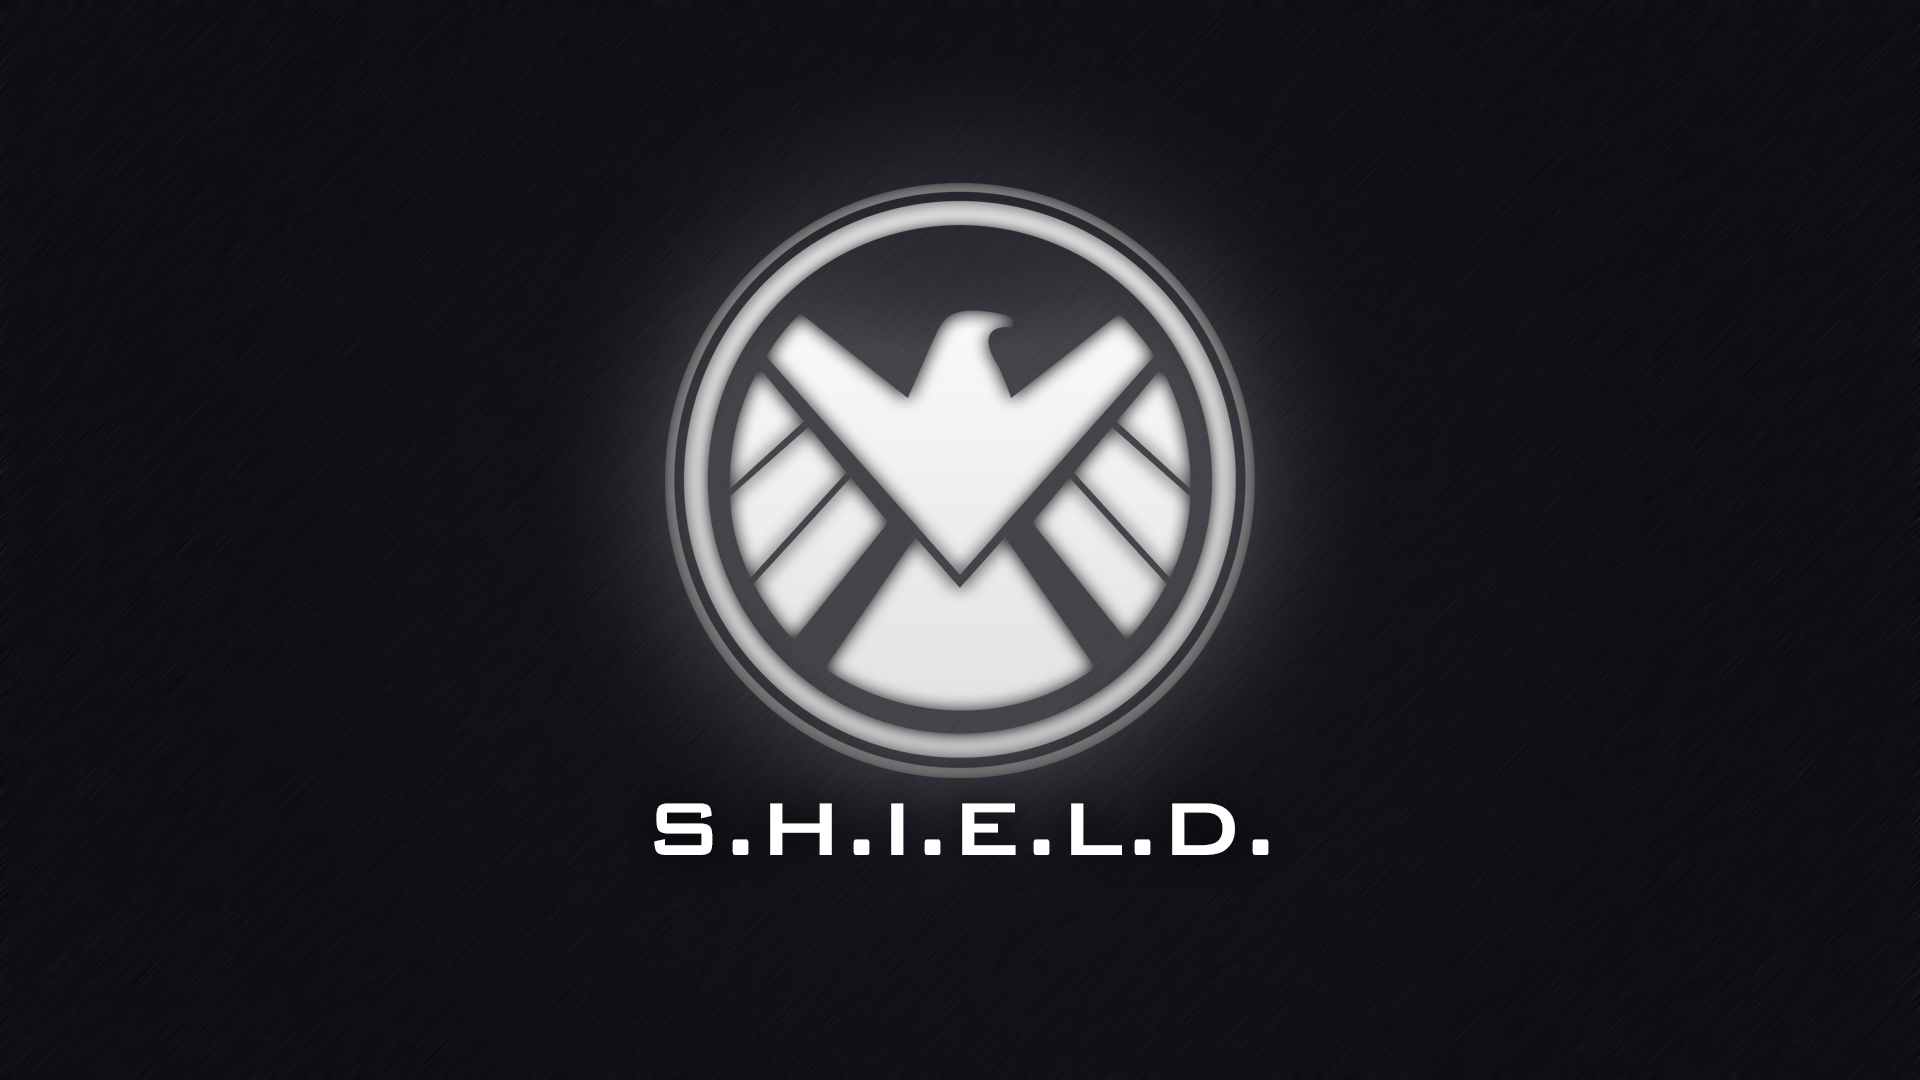 Captain Americas shield with city Wallpaper 5k Ultra HD ID7615